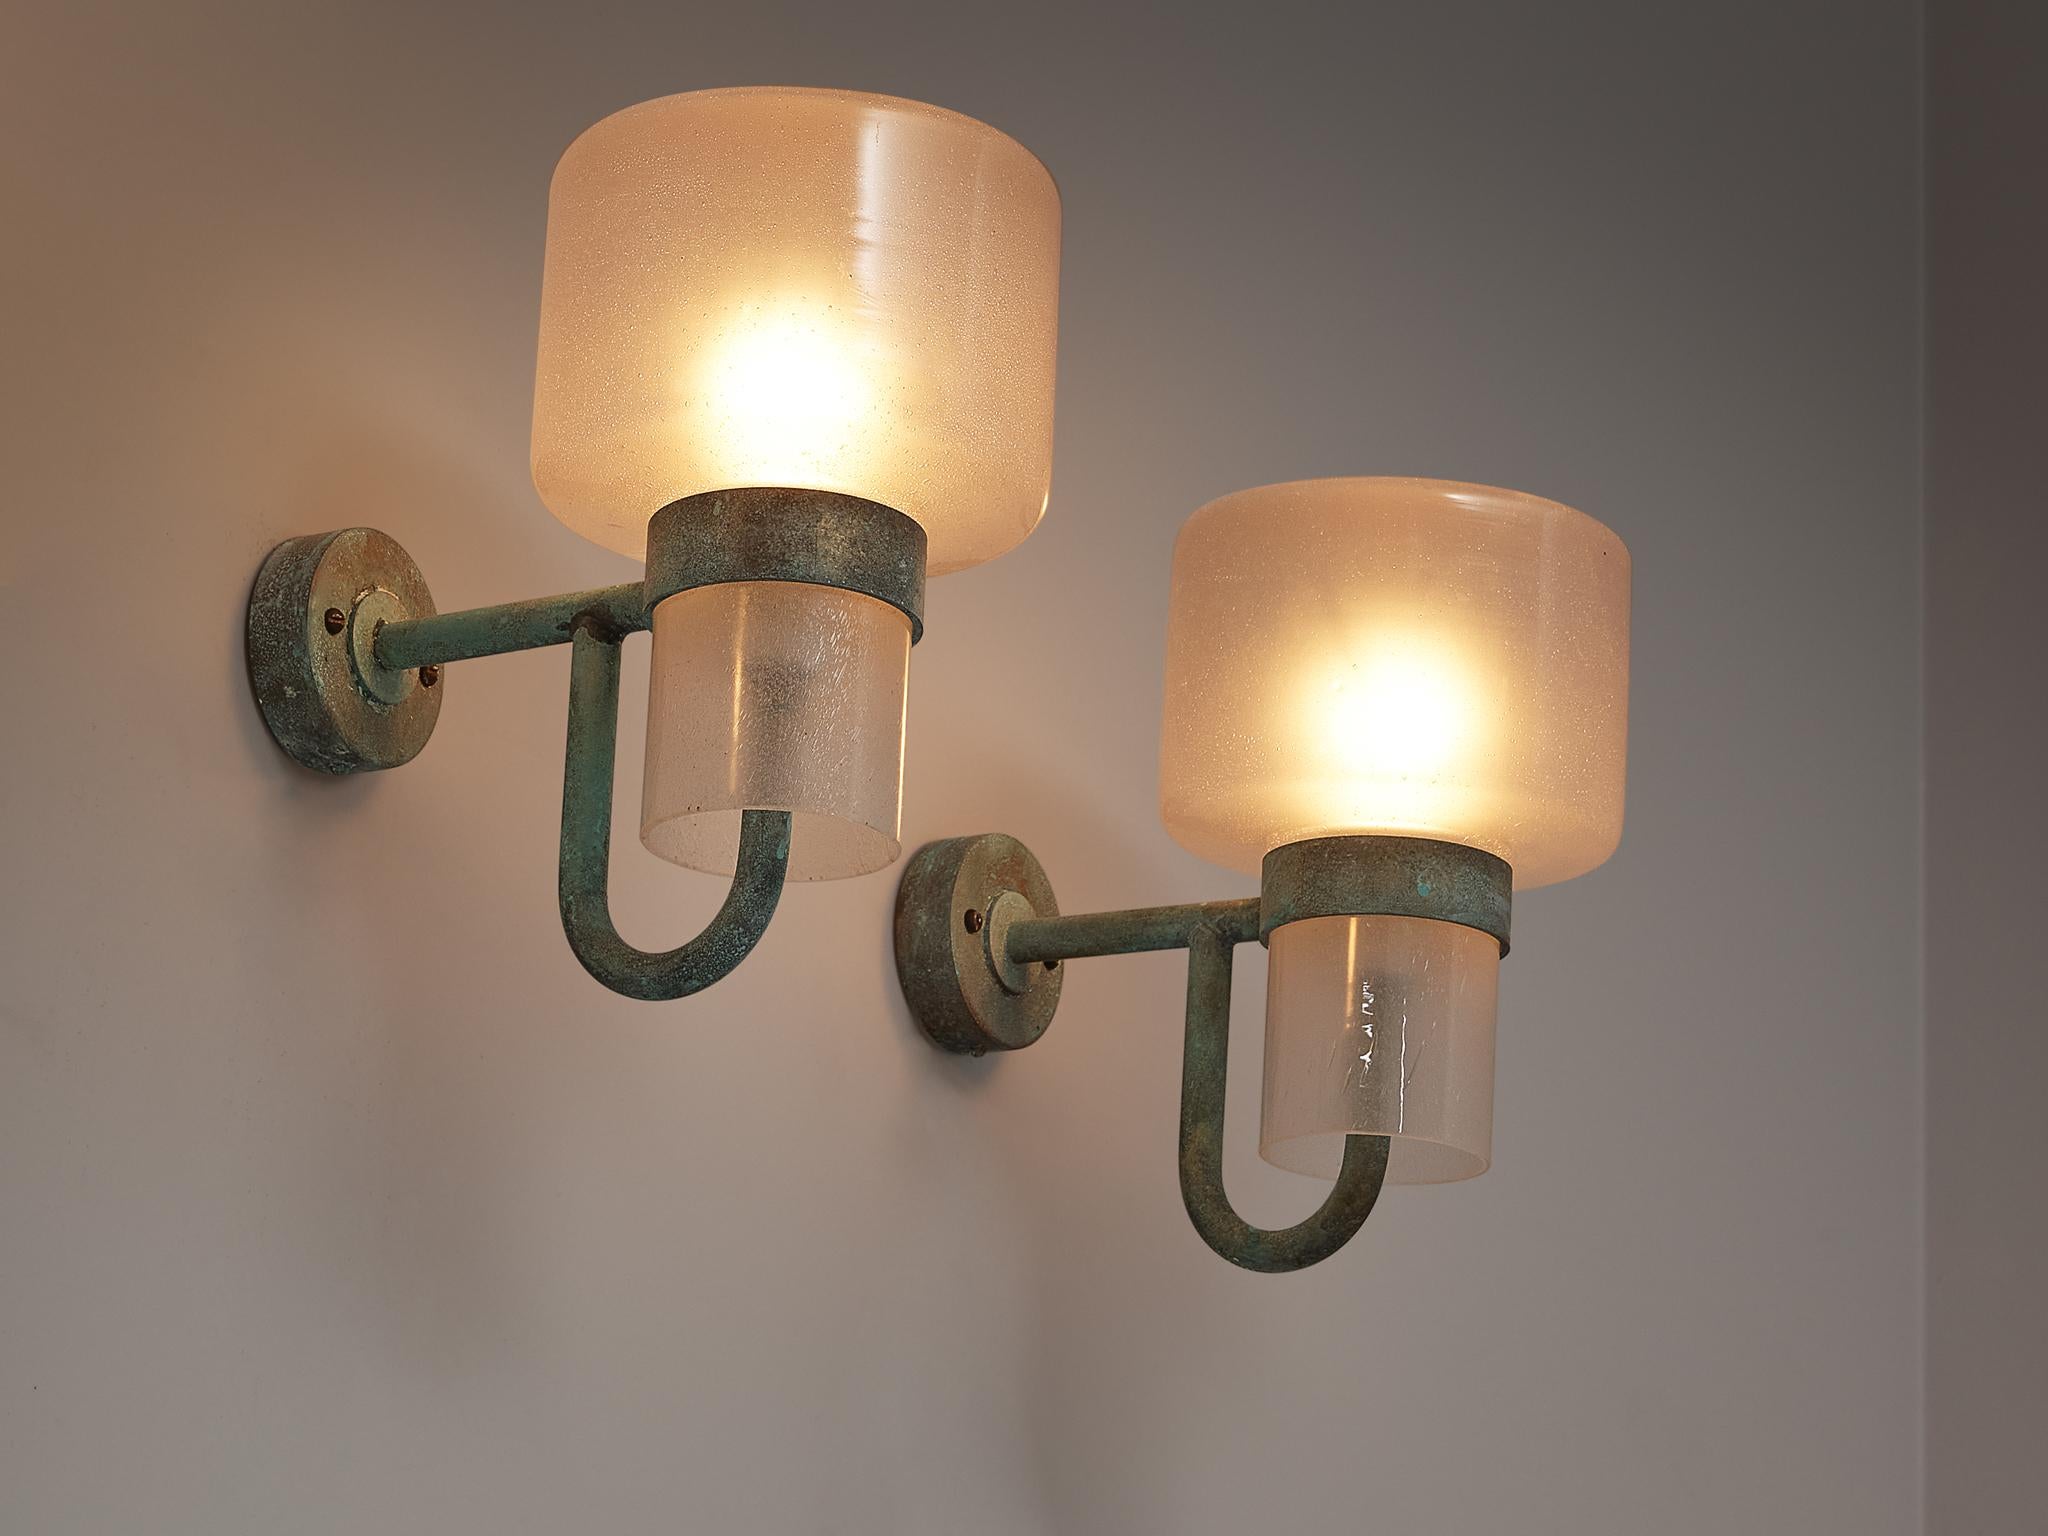 Hans-Agne Jakobsson, produced in AB Markaryd, wall light, model 138, copper and opaline glass, Sweden, 1960s.

Charming wall lights executed in copper with an opaline glass shade designed by Hans-Agne Jakobsson. These scones feature a modest copper